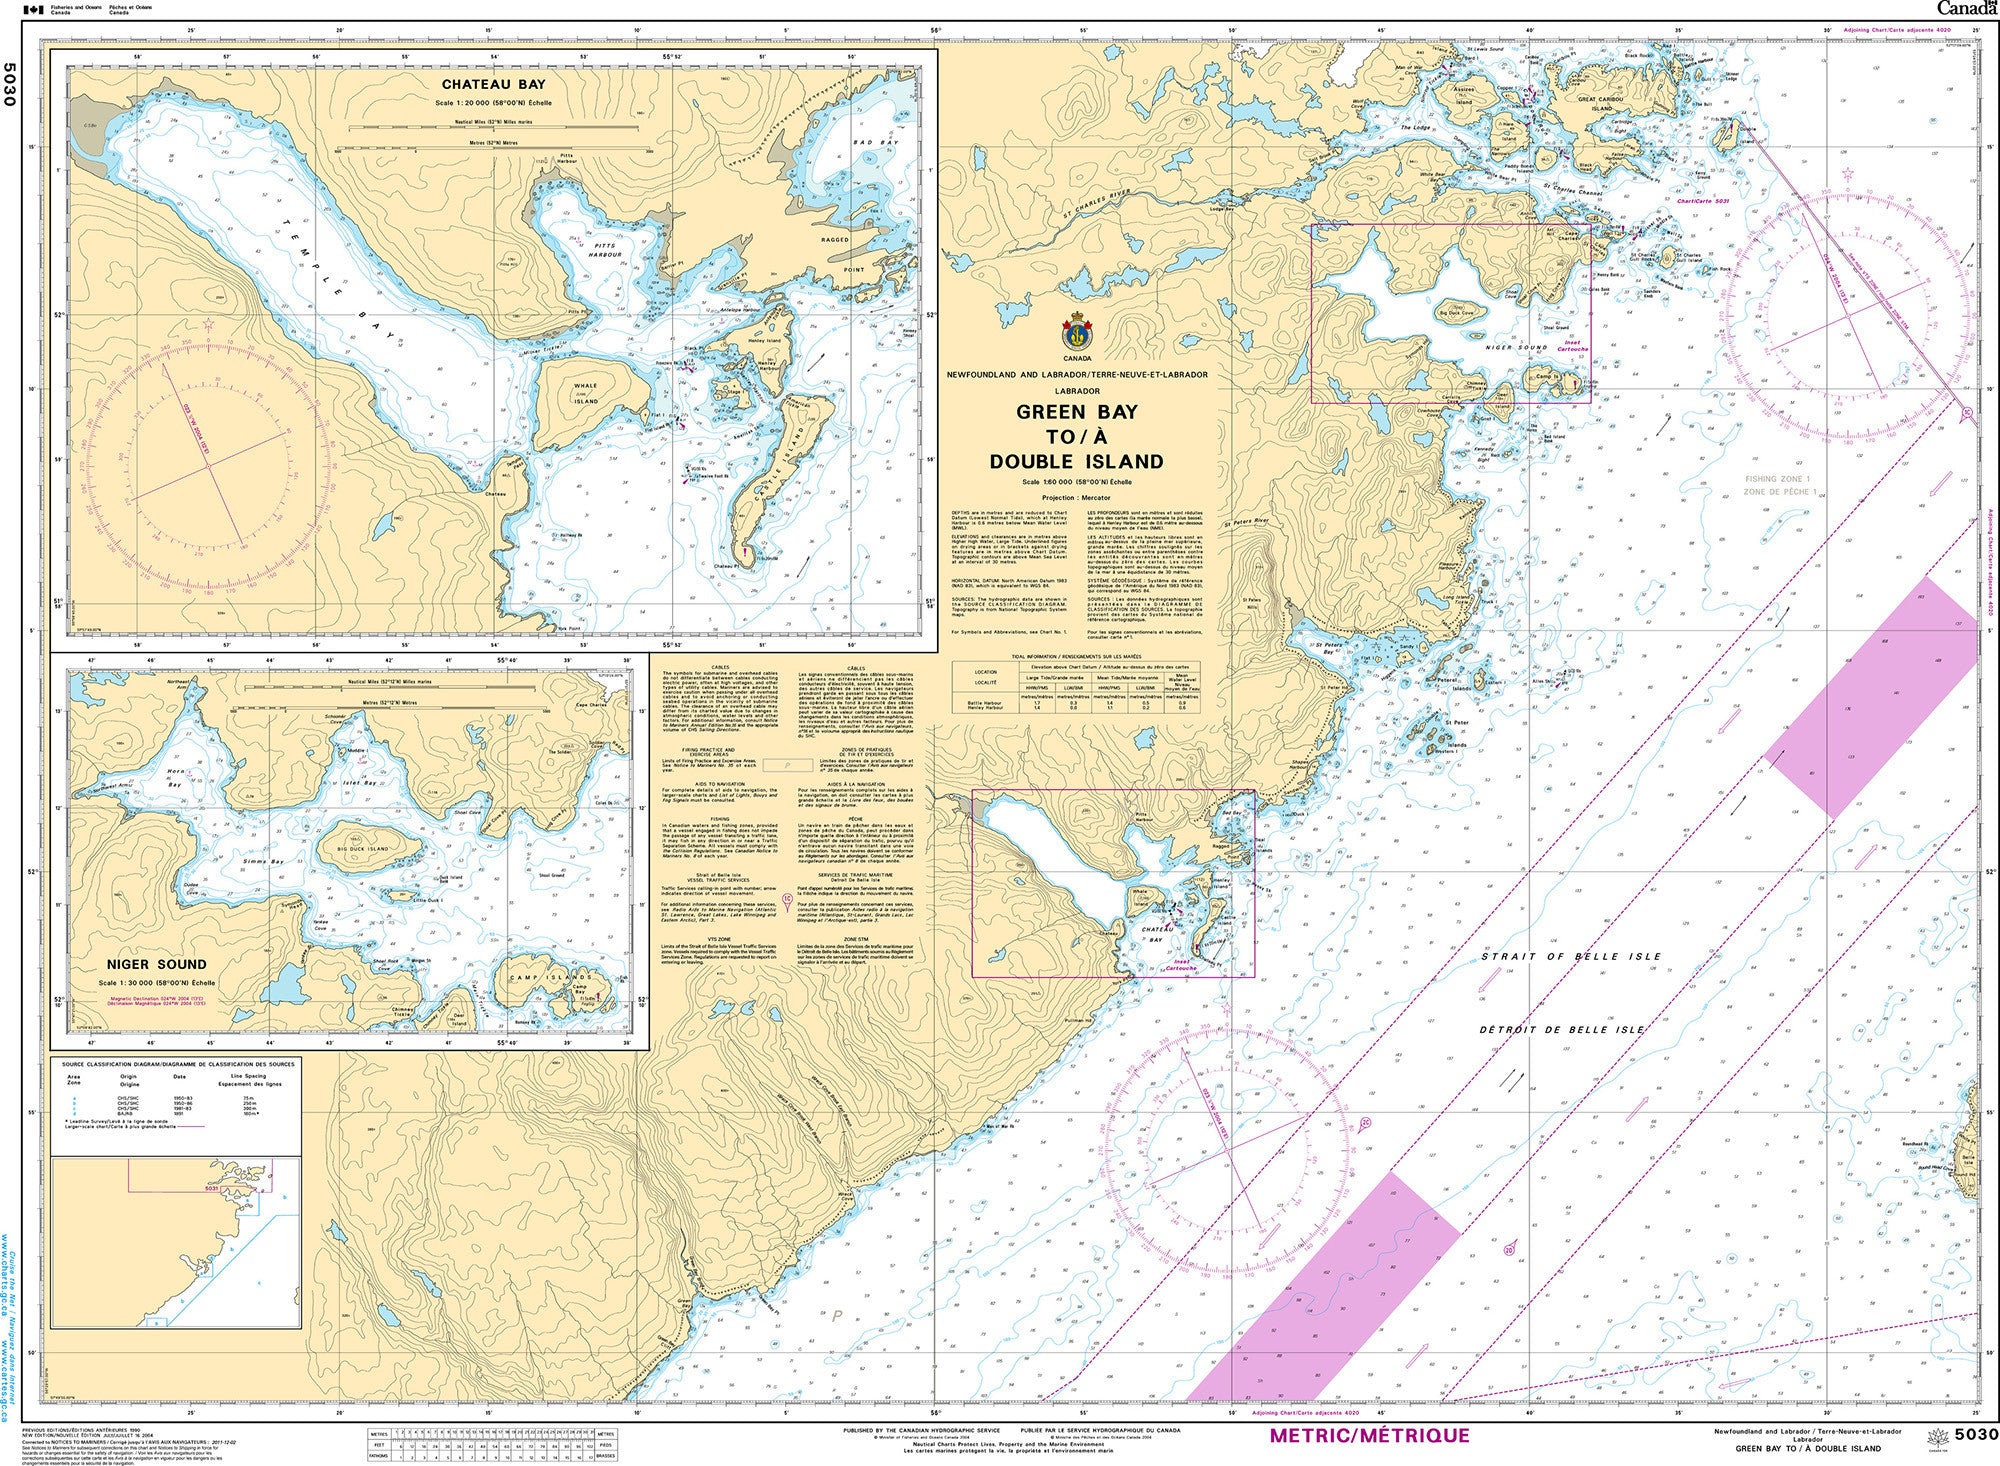 Canadian Hydrographic Service Nautical Chart CHS5030: Green Bay to/à Double Island